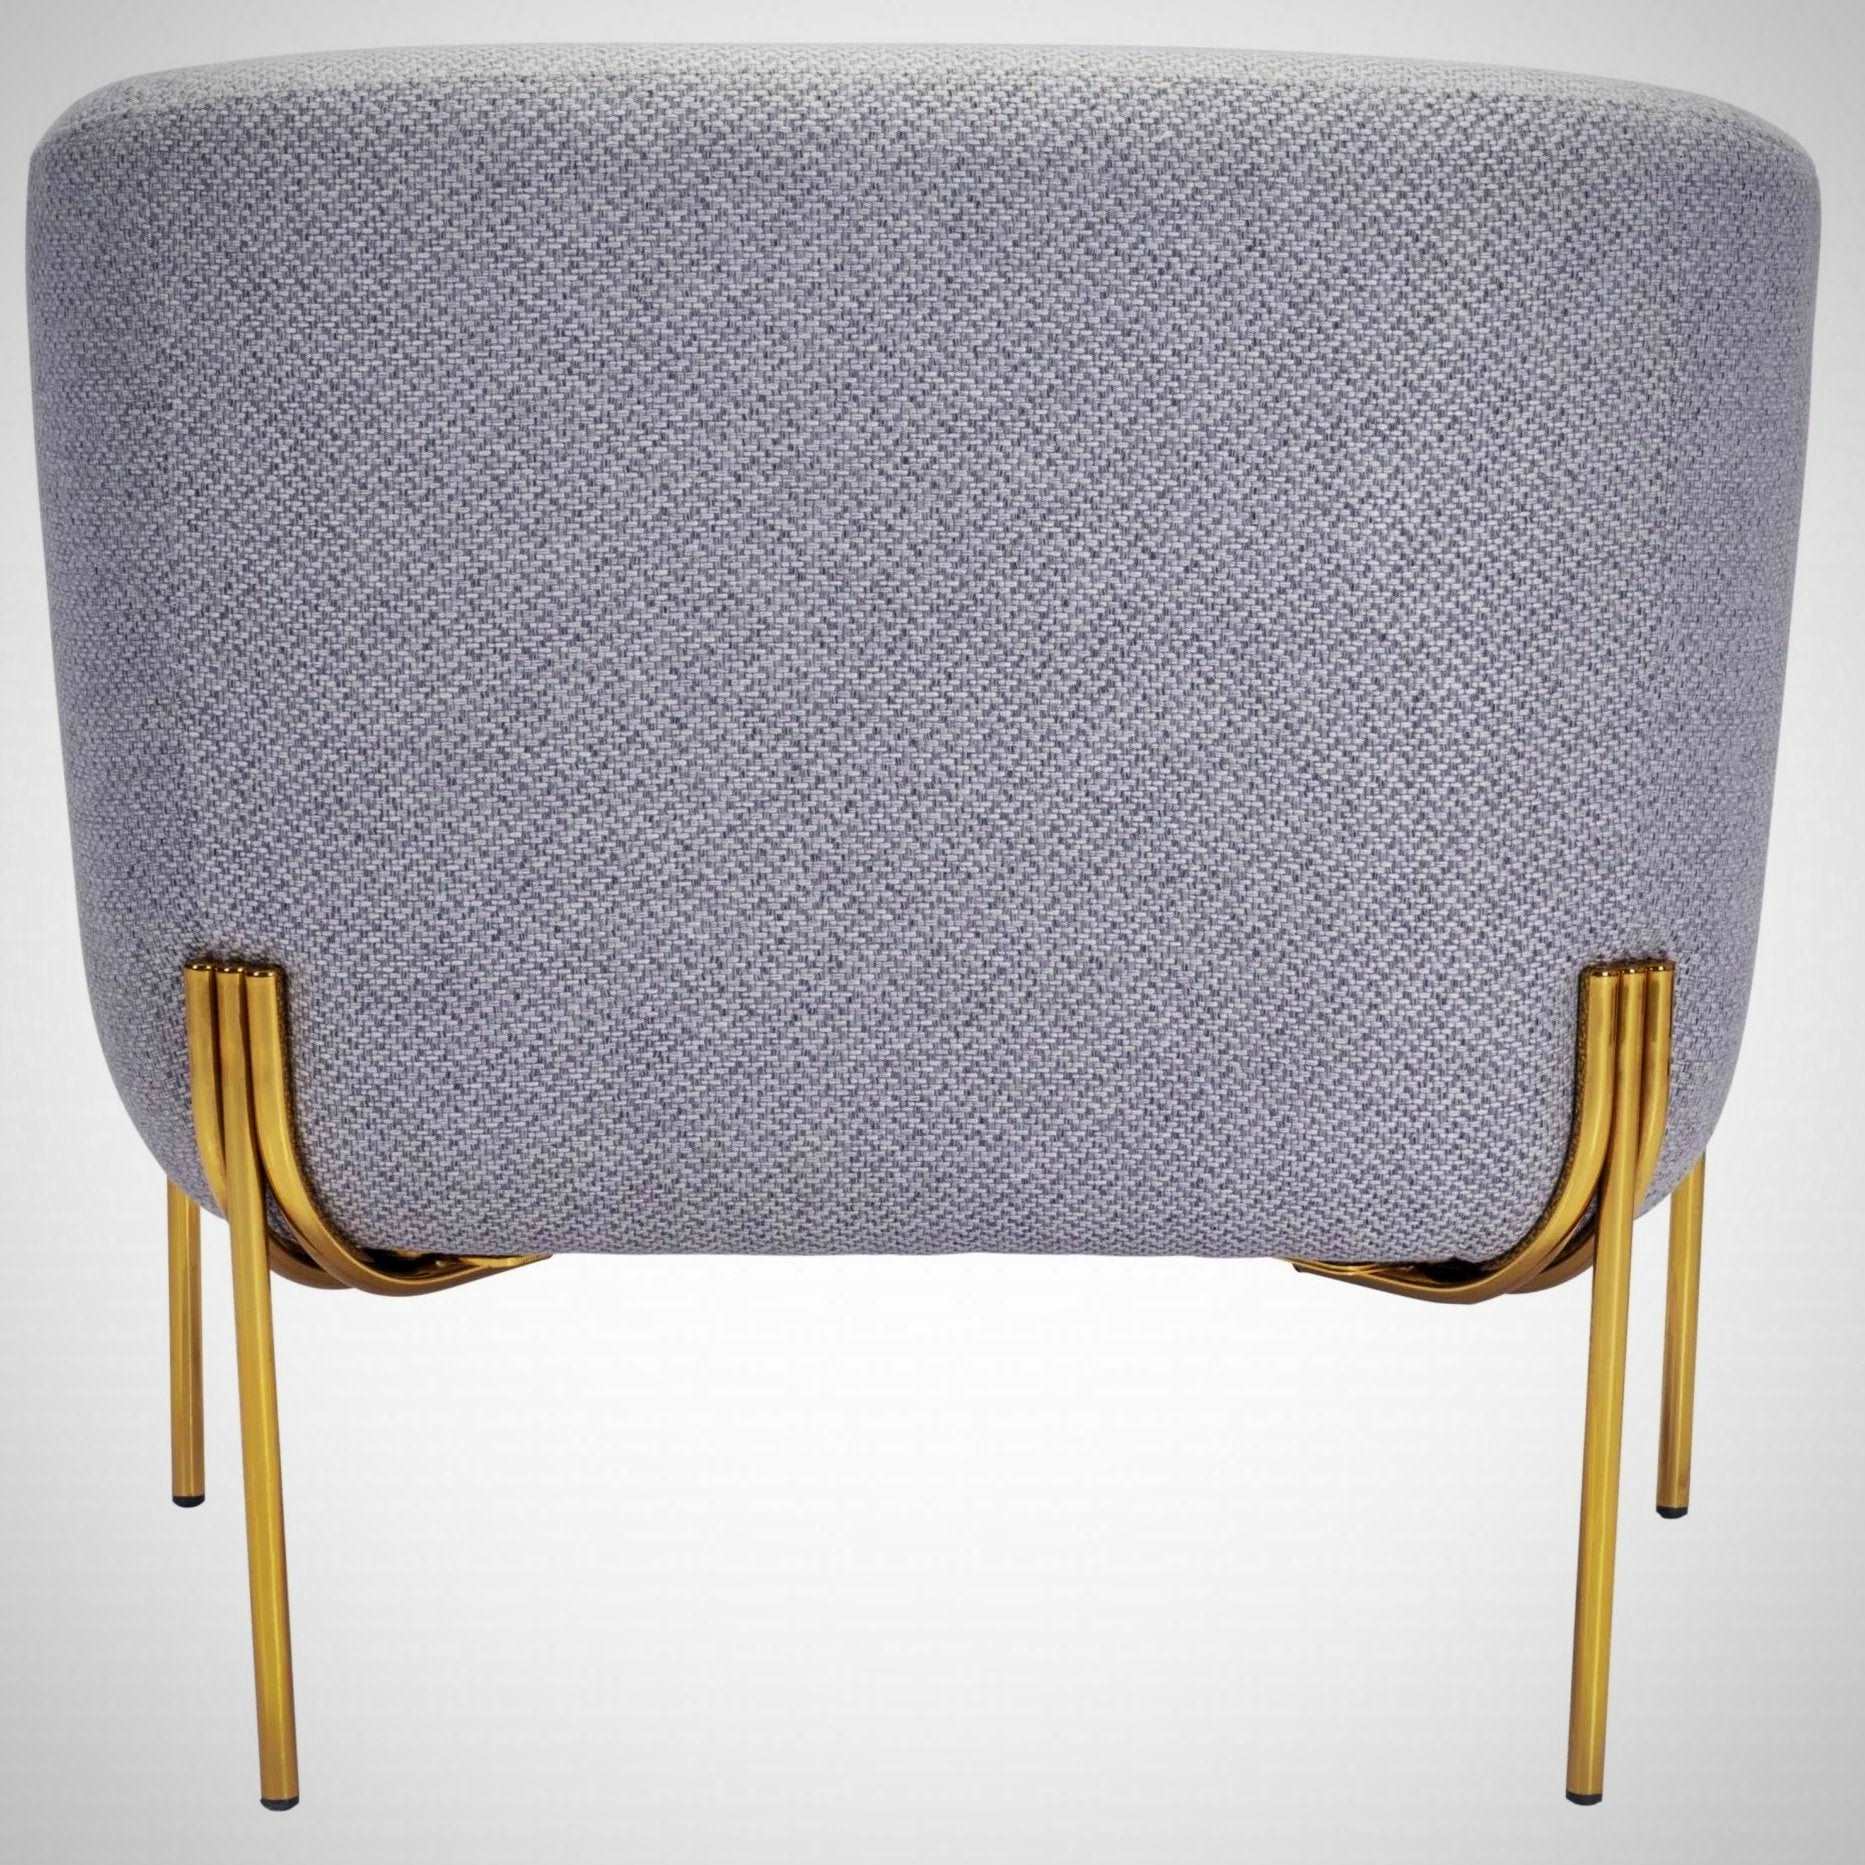 Bluxny Accent Chair